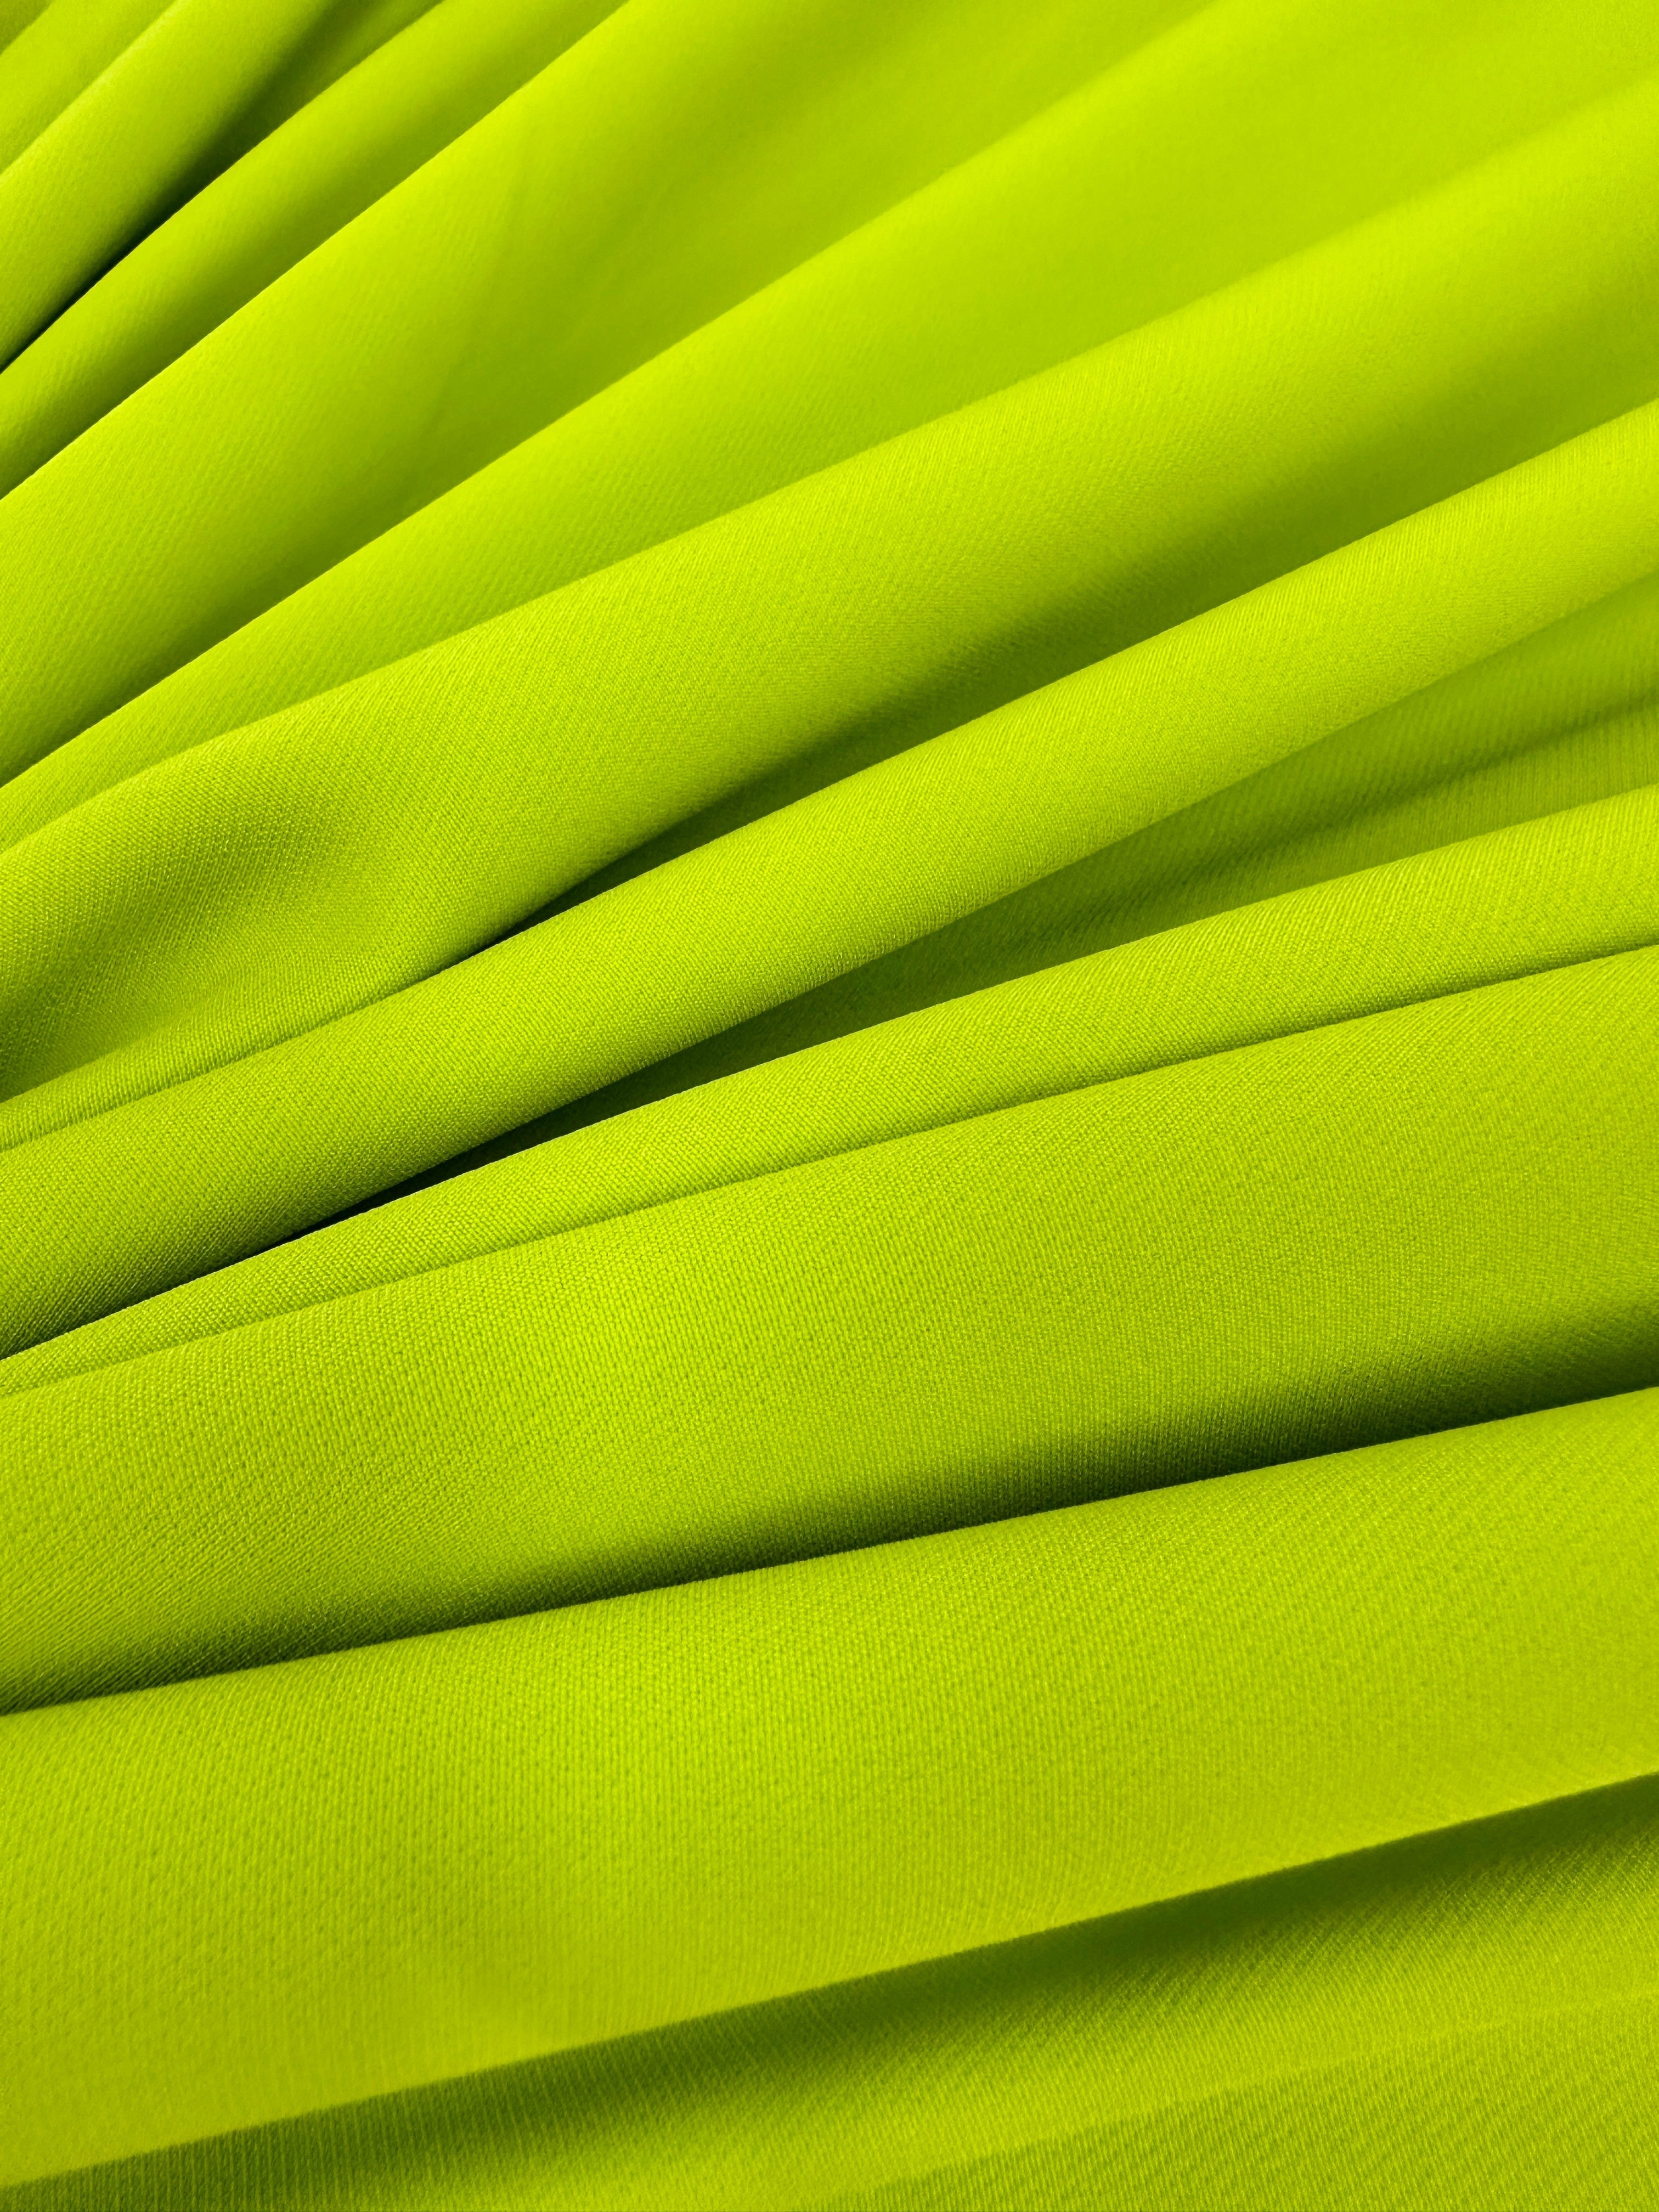 apple green stretch crepe, green Stretch Crepe, light green stretch crepe, dark green stretch crepe, stretch crepe for woman, stretch crepe for bride,  crepe on discount, crepe in low price, crepe on sale, premium crepe, solid crepe, crepe, crepe fabric